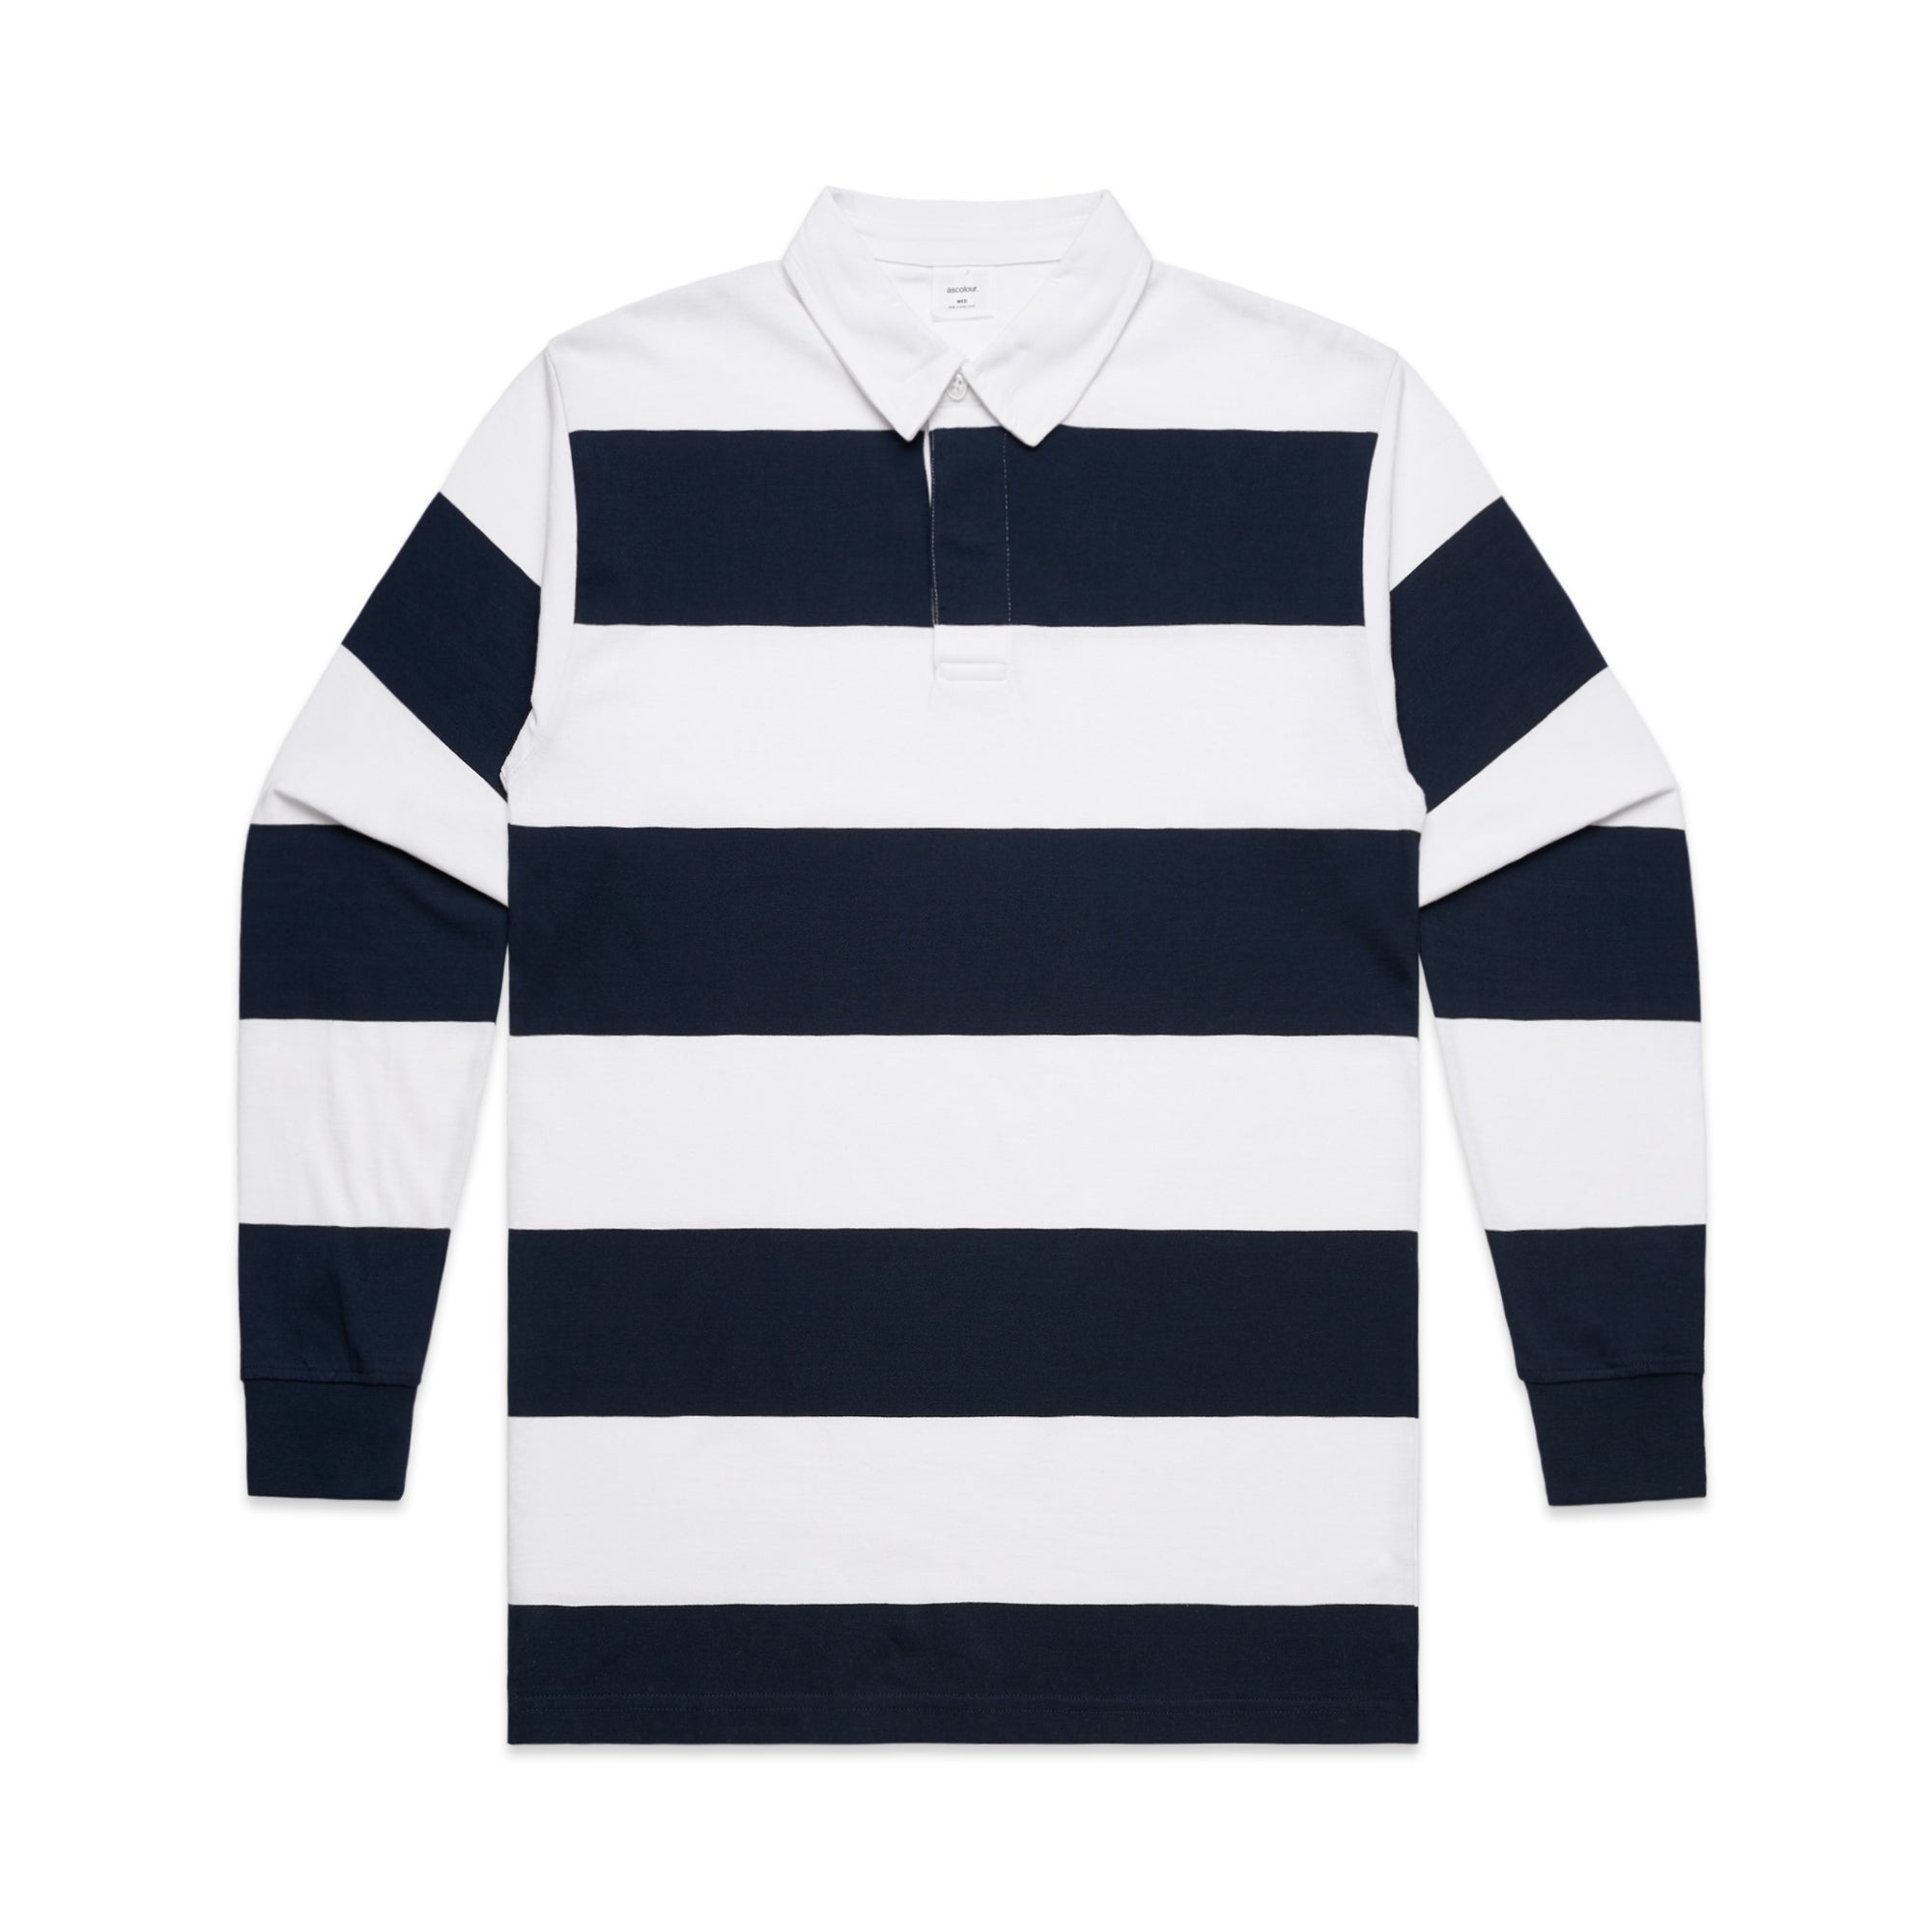 AS Colour | Men's Rugby Stripe Jersey - Custom Clothing | T Shirt Printing | Embroidery | Screen Printing | Print Room NZ